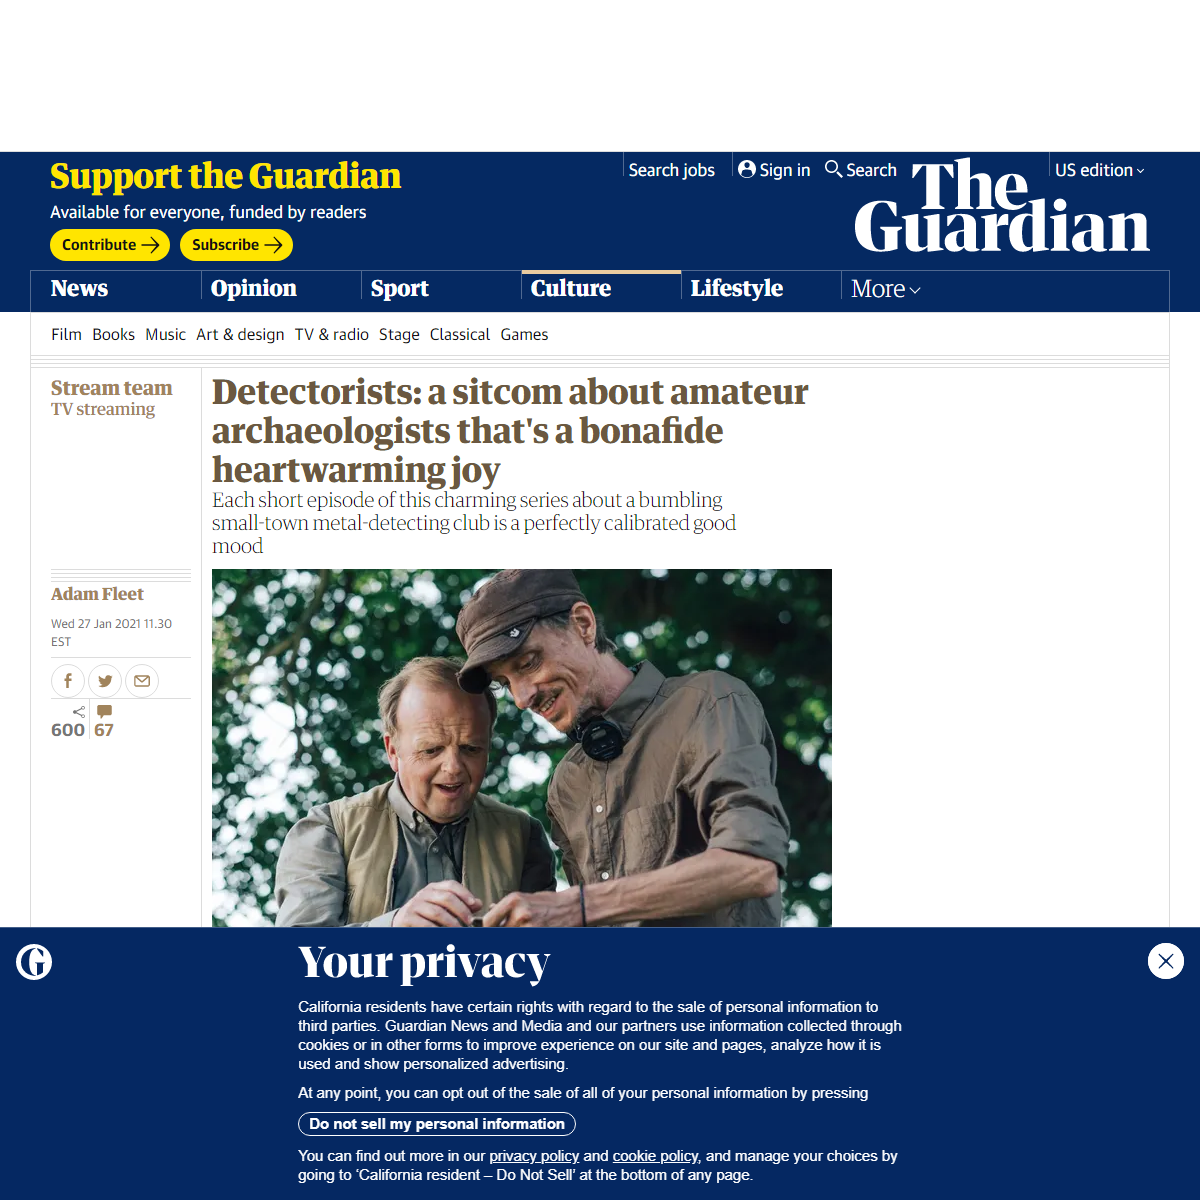 A complete backup of https://www.theguardian.com/culture/2021/jan/28/detectorists-a-sitcom-about-amateur-archaeologists-thats-a-